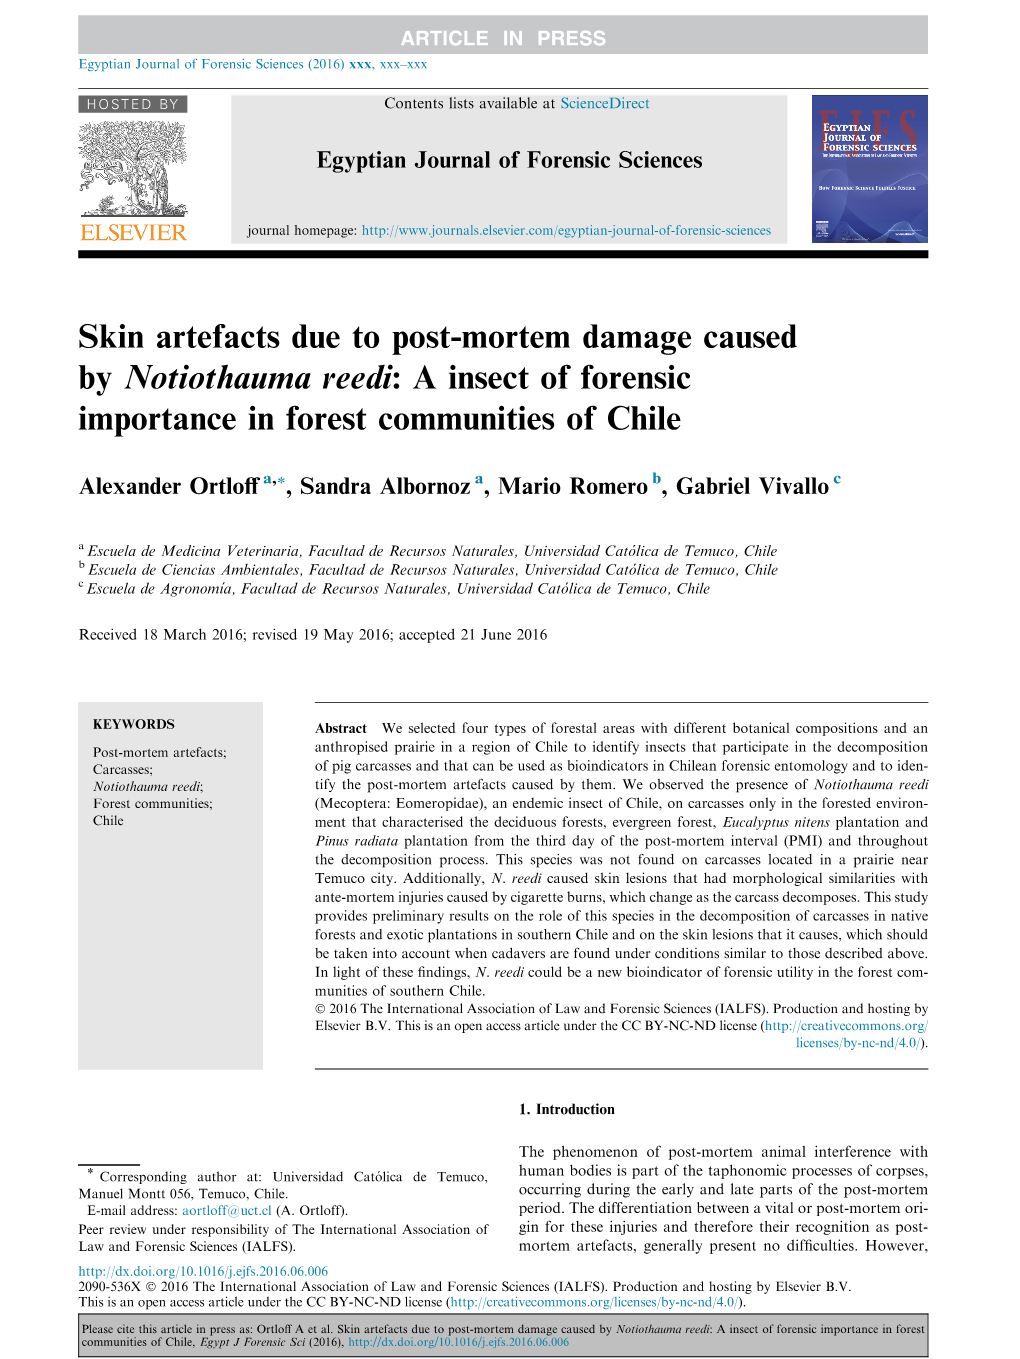 Skin Artefacts Due to Post-Mortem Damage Caused by Notiothauma Reedi: a Insect of Forensic Importance in Forest Communities of Chile